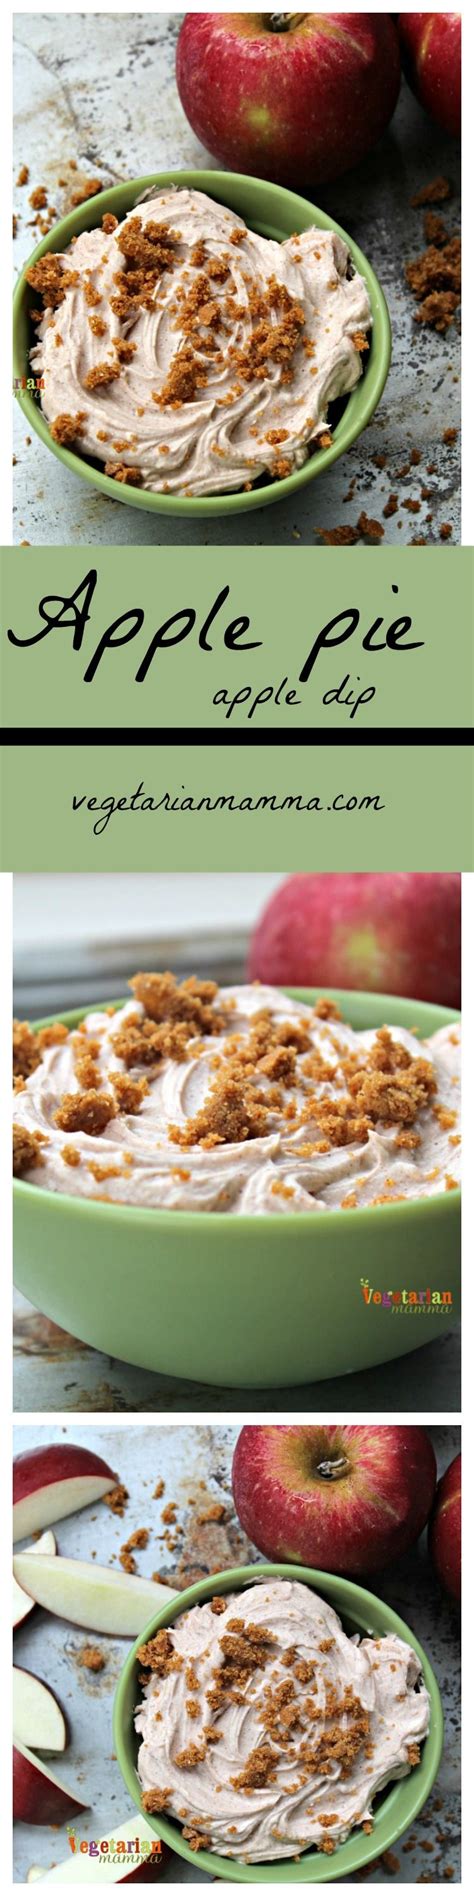 Whether you're shopping for premade sweets like brownies, cakes, and cookies, or mixes and ingredients for. Apple Pie Dip - Gluten Free, Dairy Free, Nut Free Delicious Fall Snack @enjoylifefoods # ...